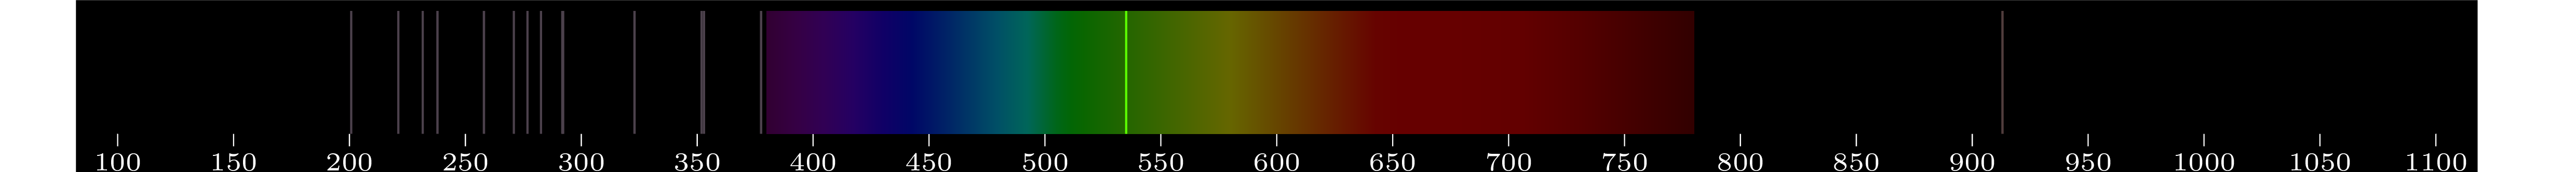 emmision spectra of element Tl